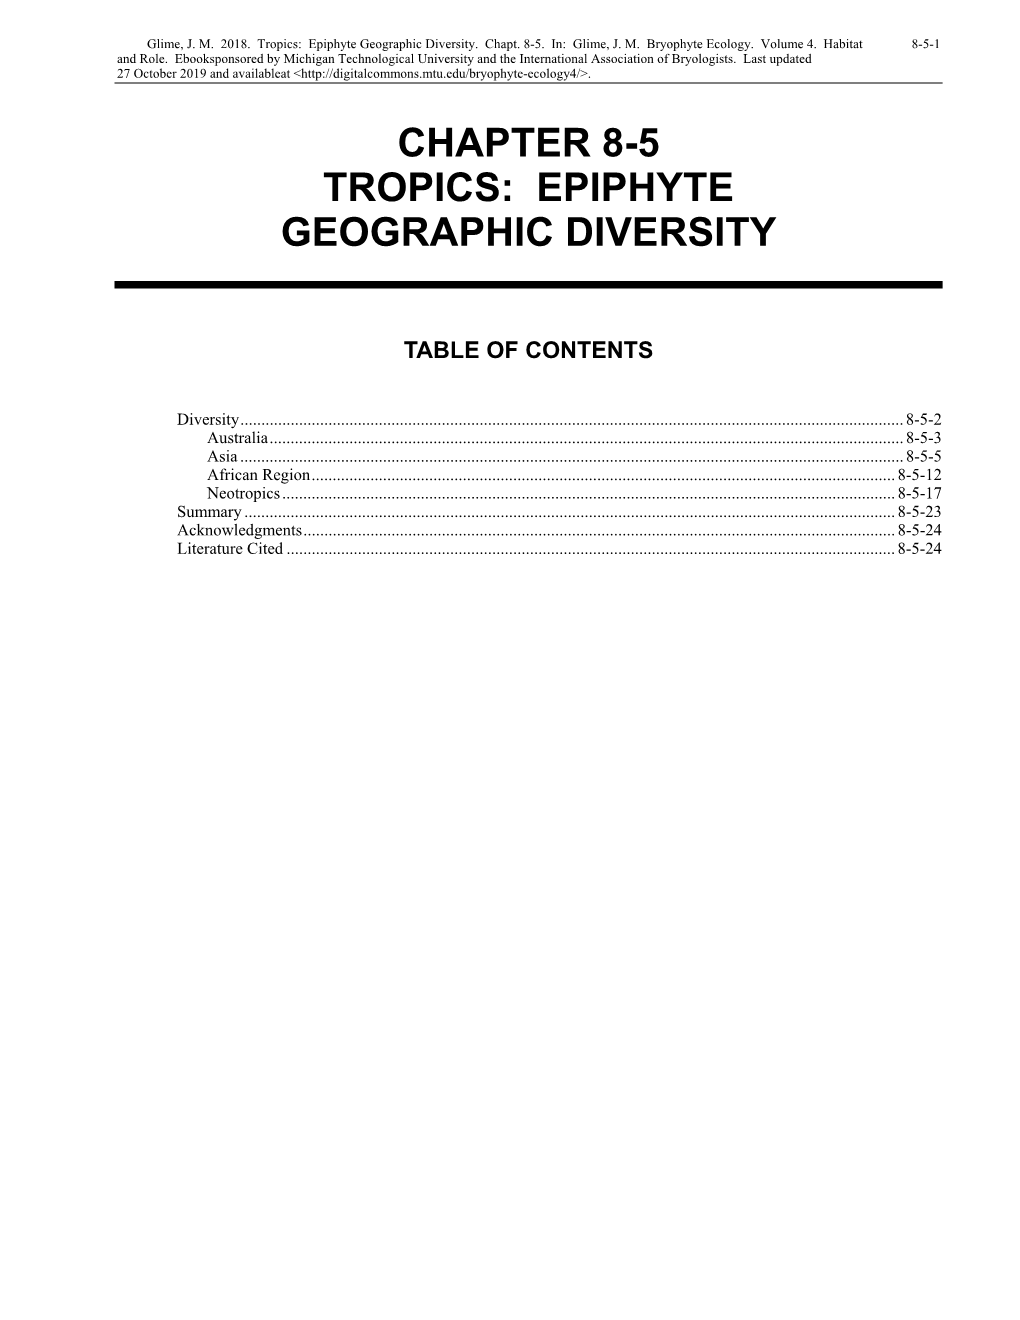 Volume 4, Chapter 8-5: Tropics: Epiphyte Geographic Diversity